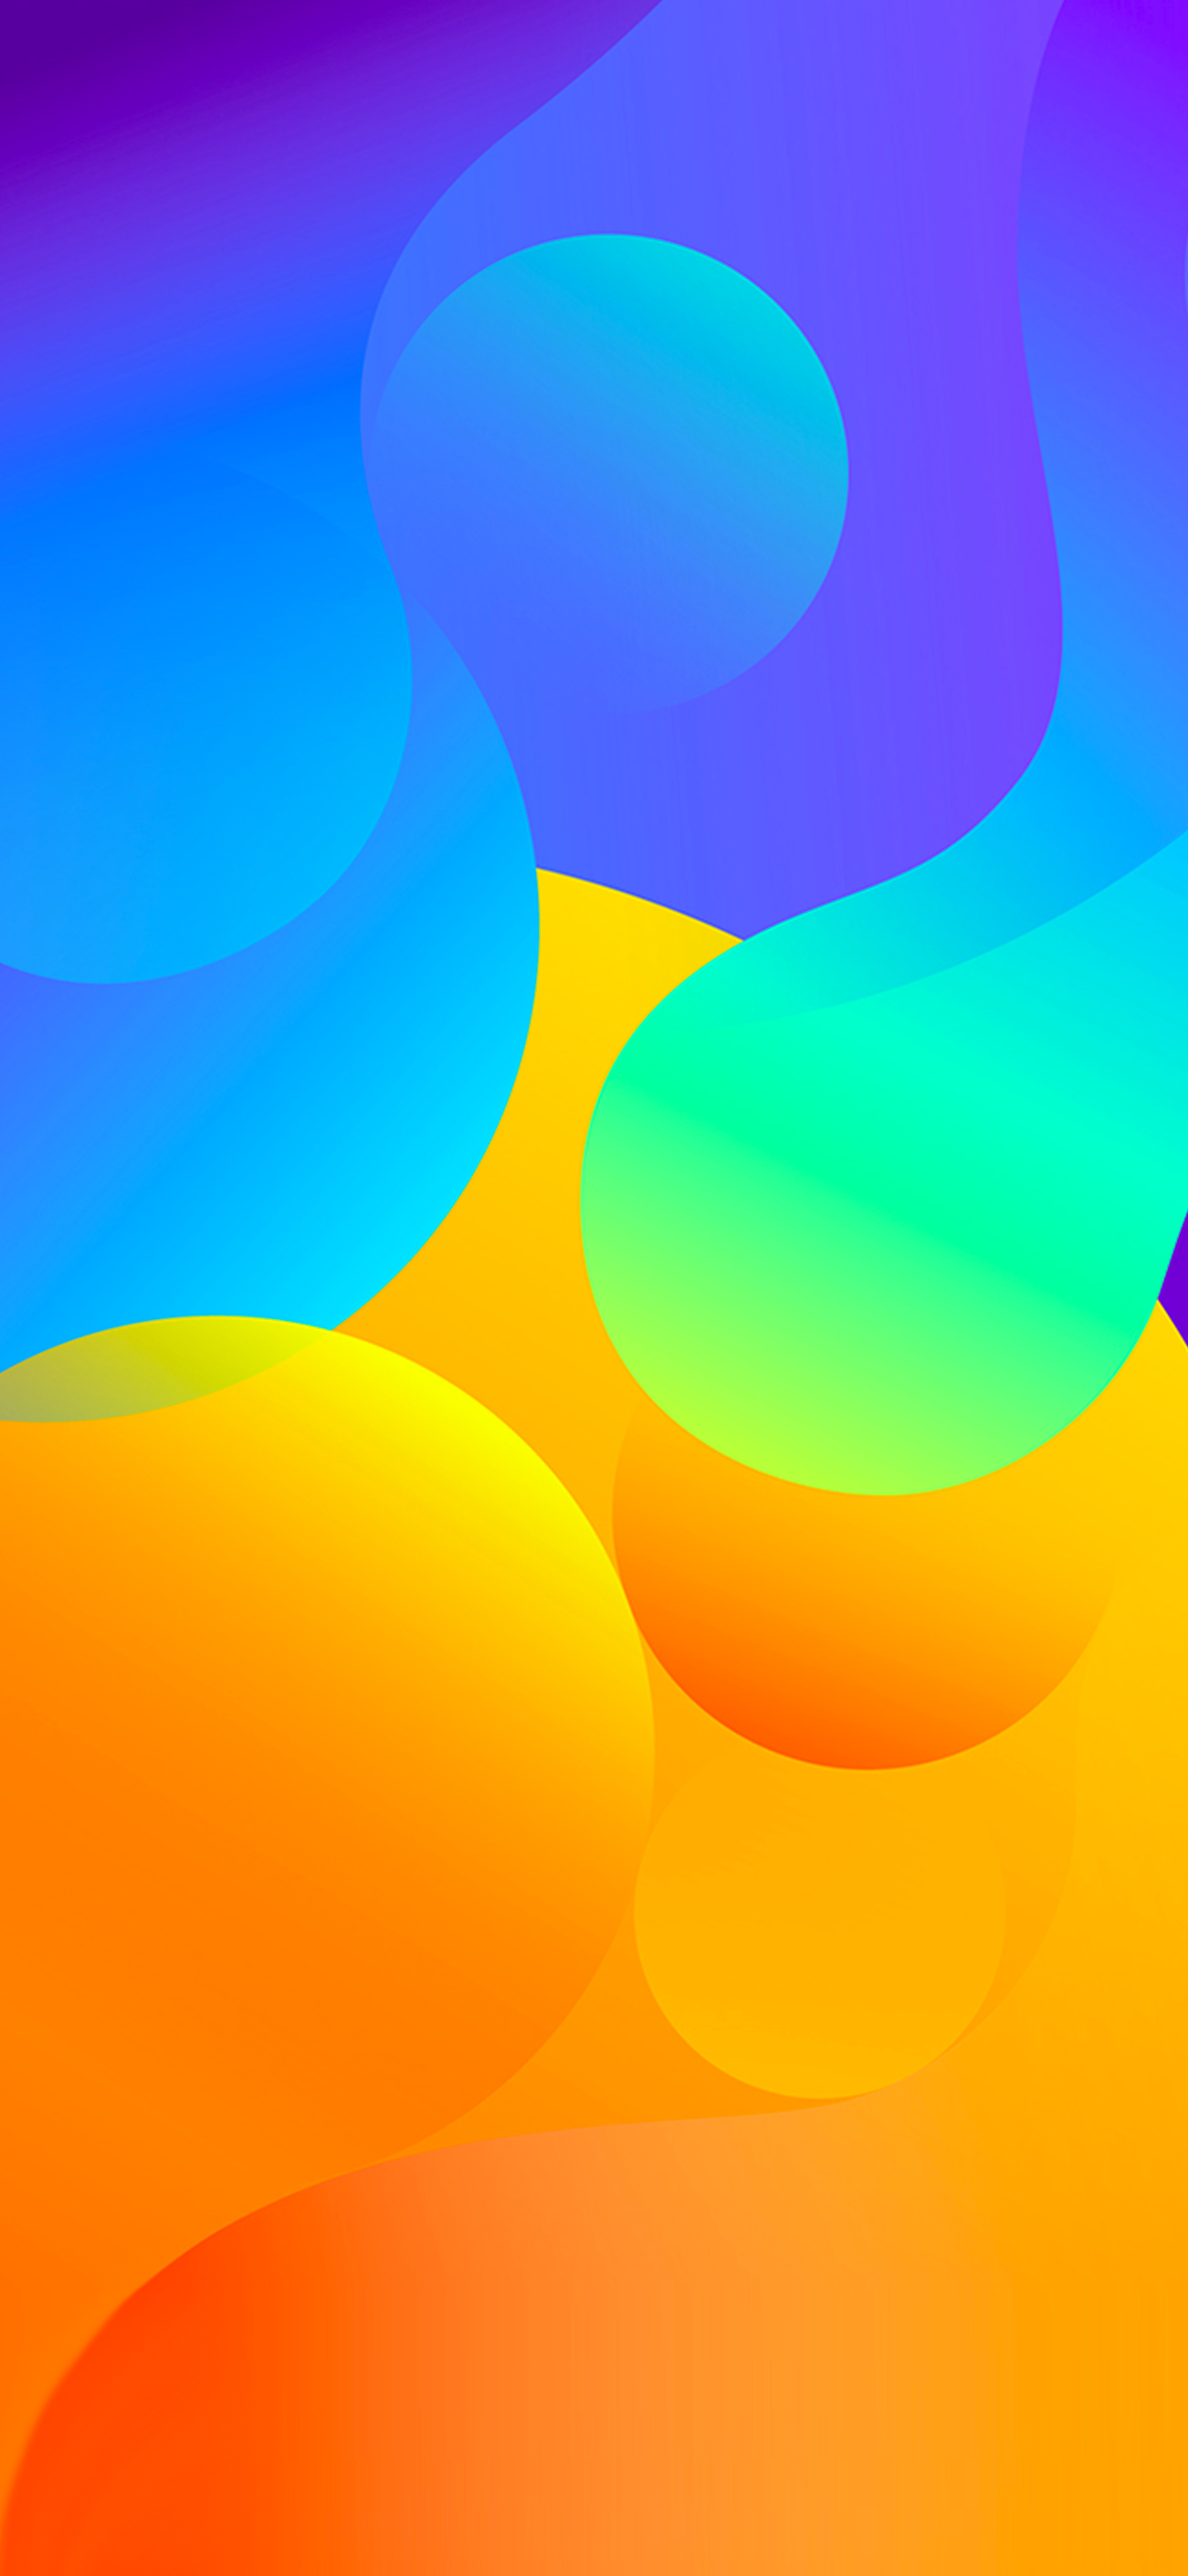 BCB - Big Colorful Bubbles - Wallpapers Central